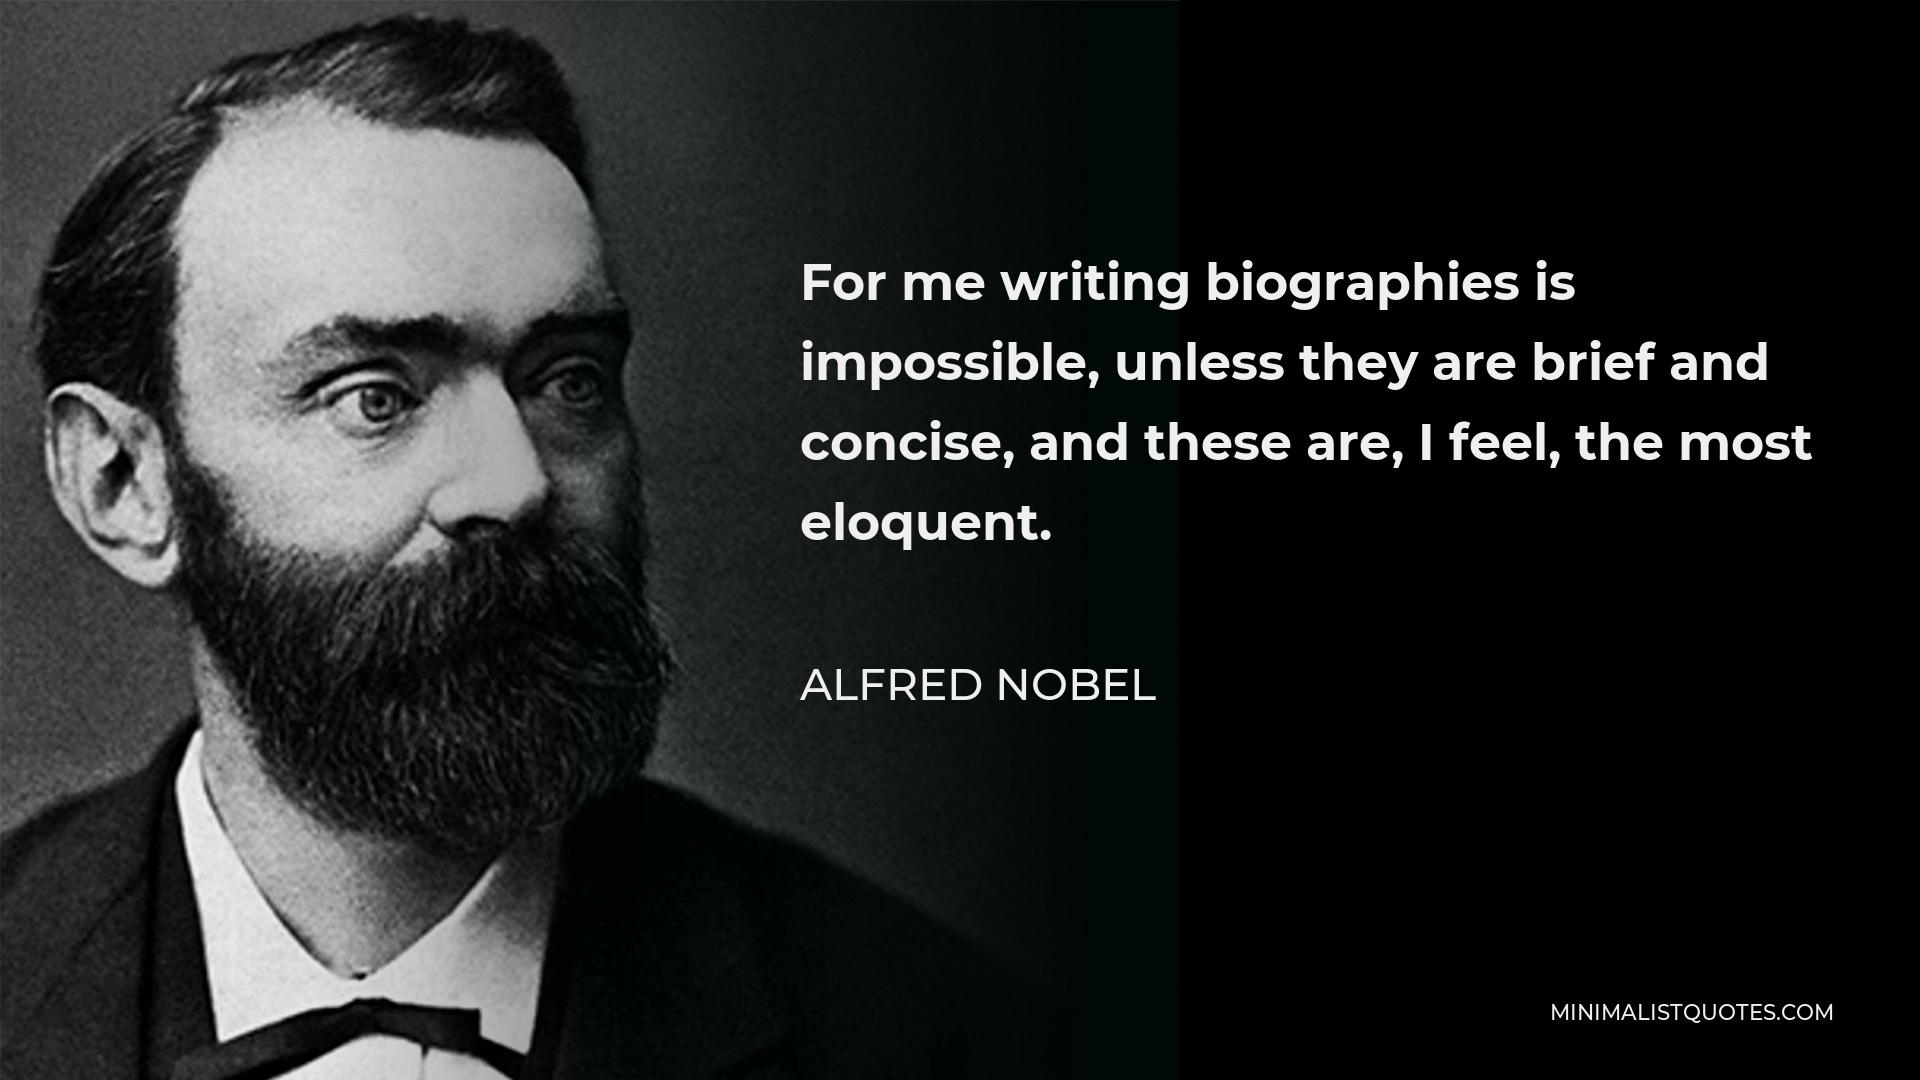 Alfred Nobel Quote - For me writing biographies is impossible, unless they are brief and concise, and these are, I feel, the most eloquent.